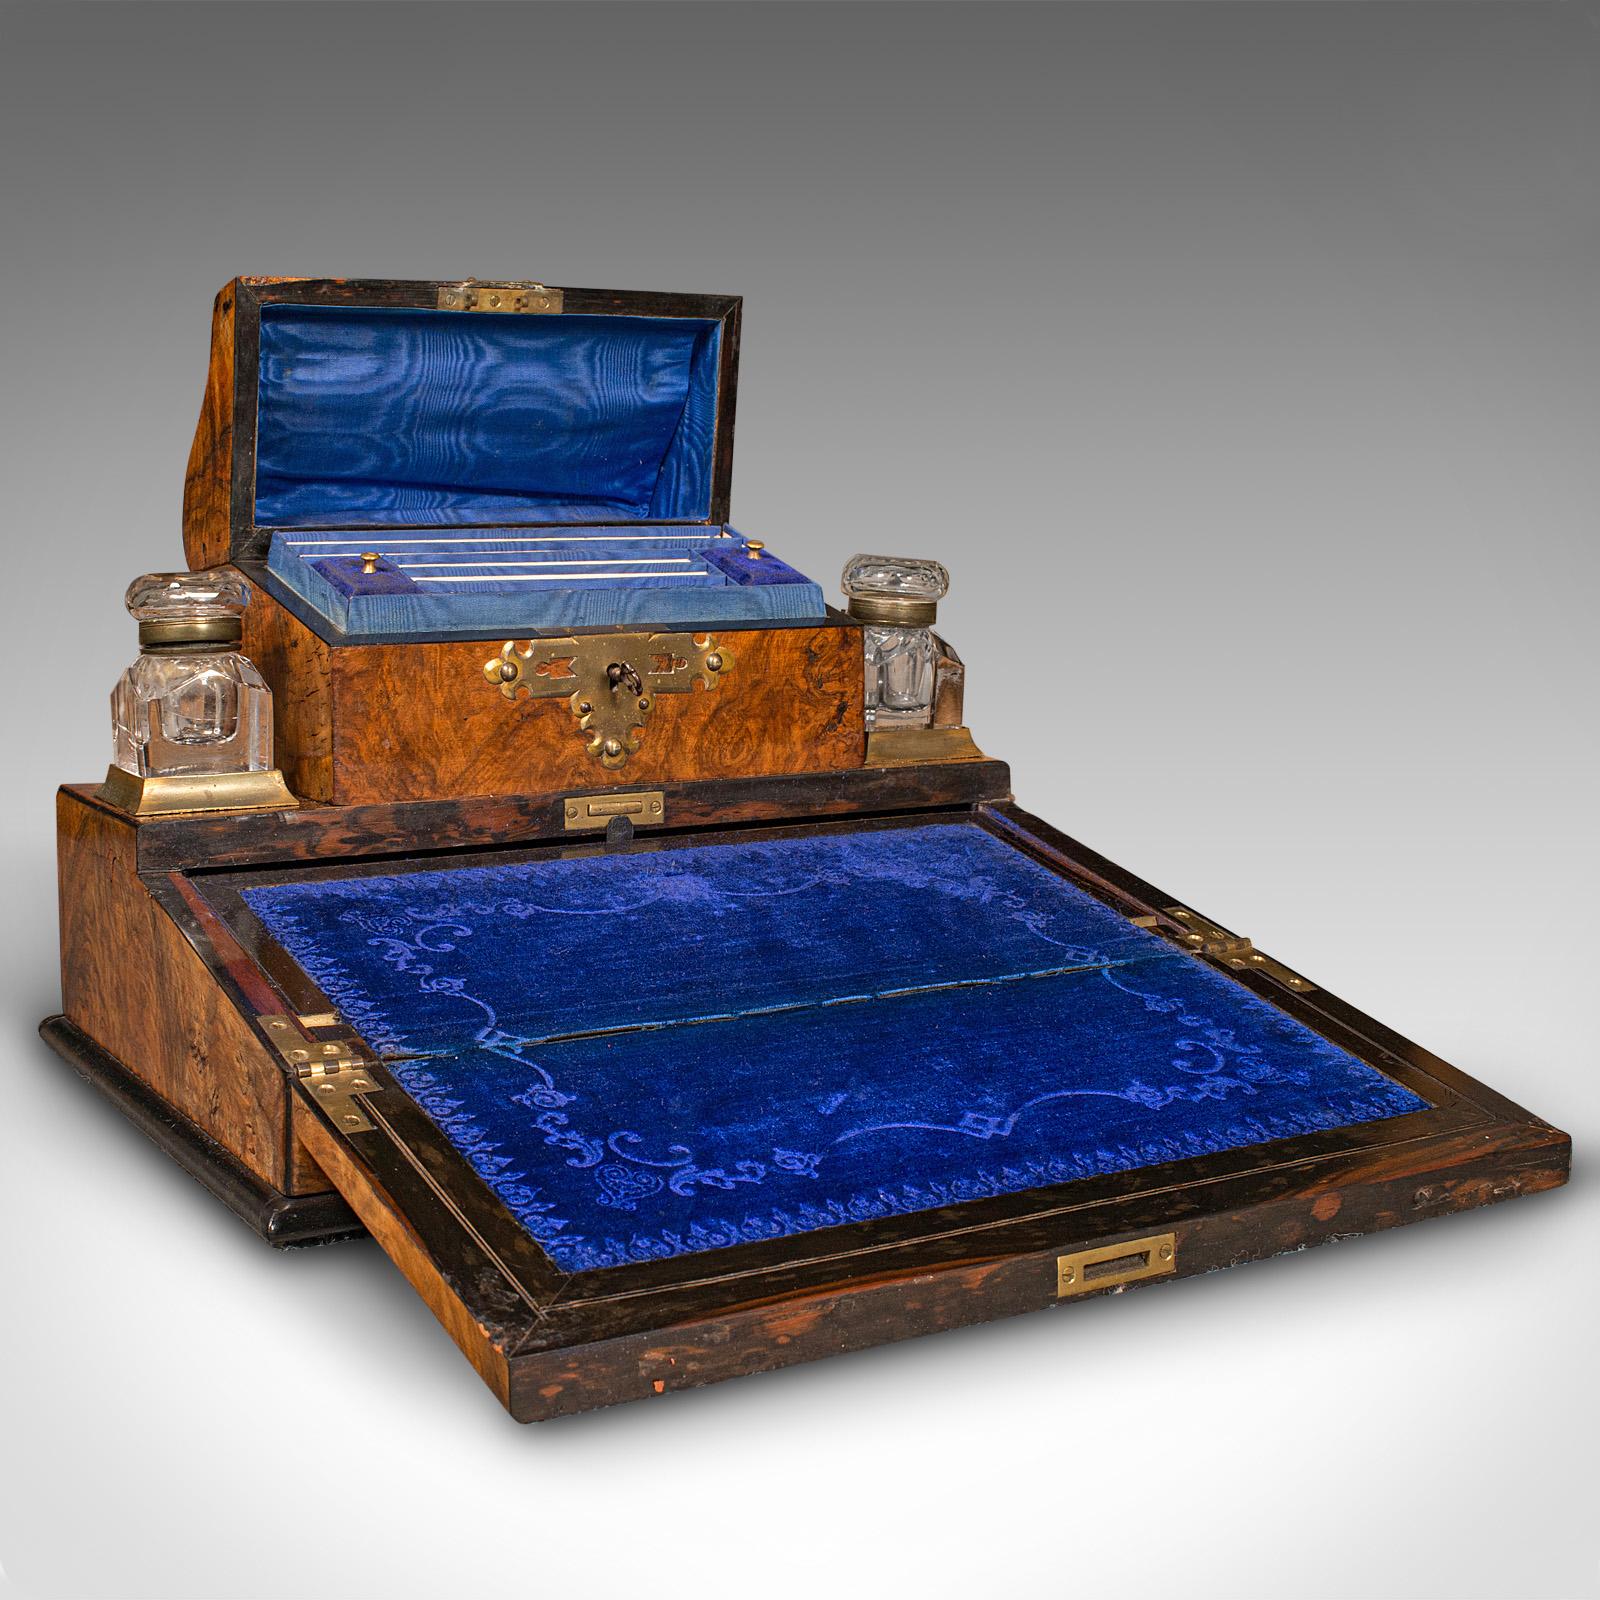 This is an antique desktop writing slope. An English, burr walnut and brass correspondence box, dating to the mid Victorian period, circa 1860.

An attractive and delightfully appointed slope for the desktop
Displays a desirable aged patina and in